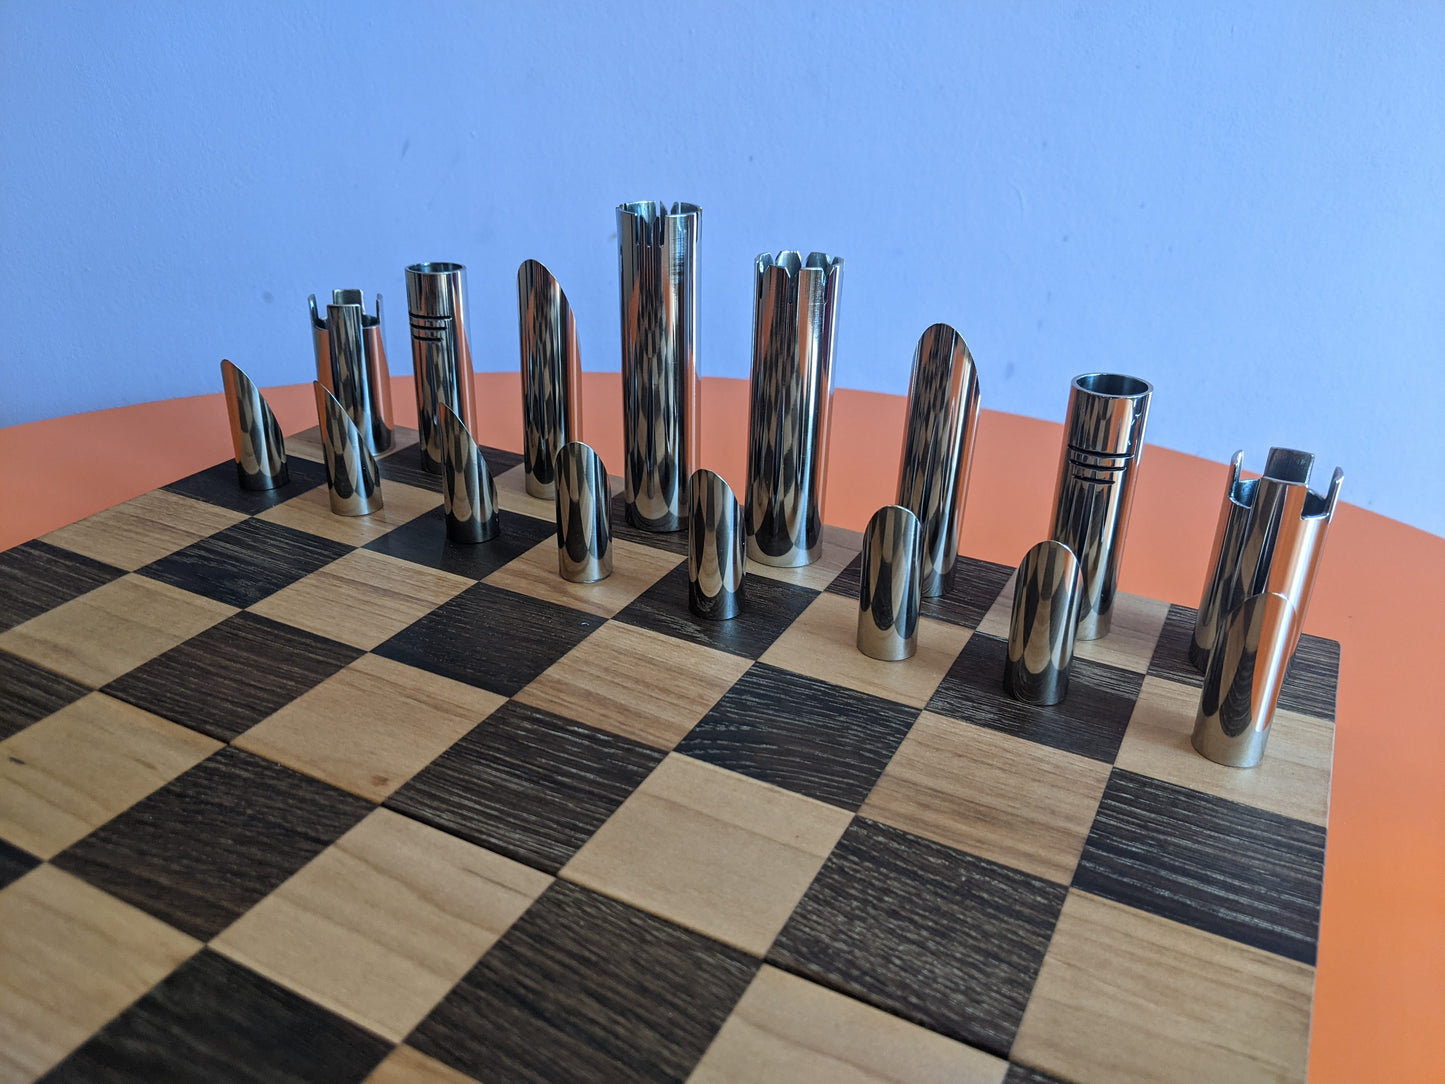 Foldable Stainless Steel Chess Set with Wooden Chessboard/box. Handmade.